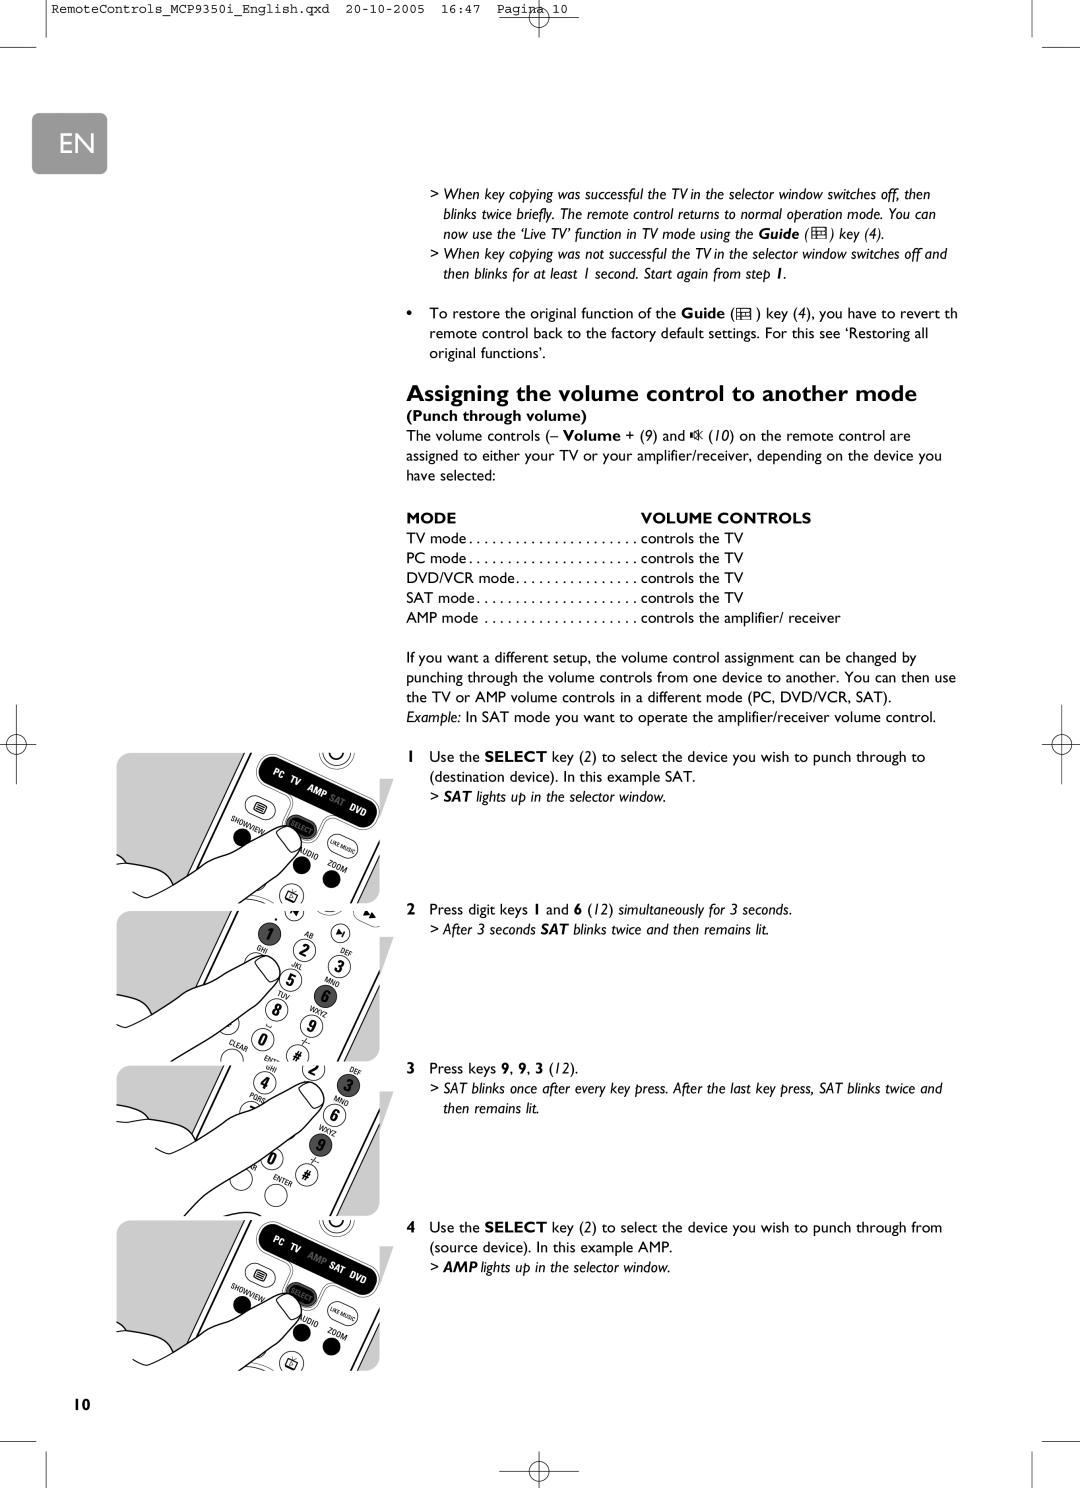 Philips RC4370 user manual Assigning the volume control to another mode, Punch through volume, Mode, Volume Controls 